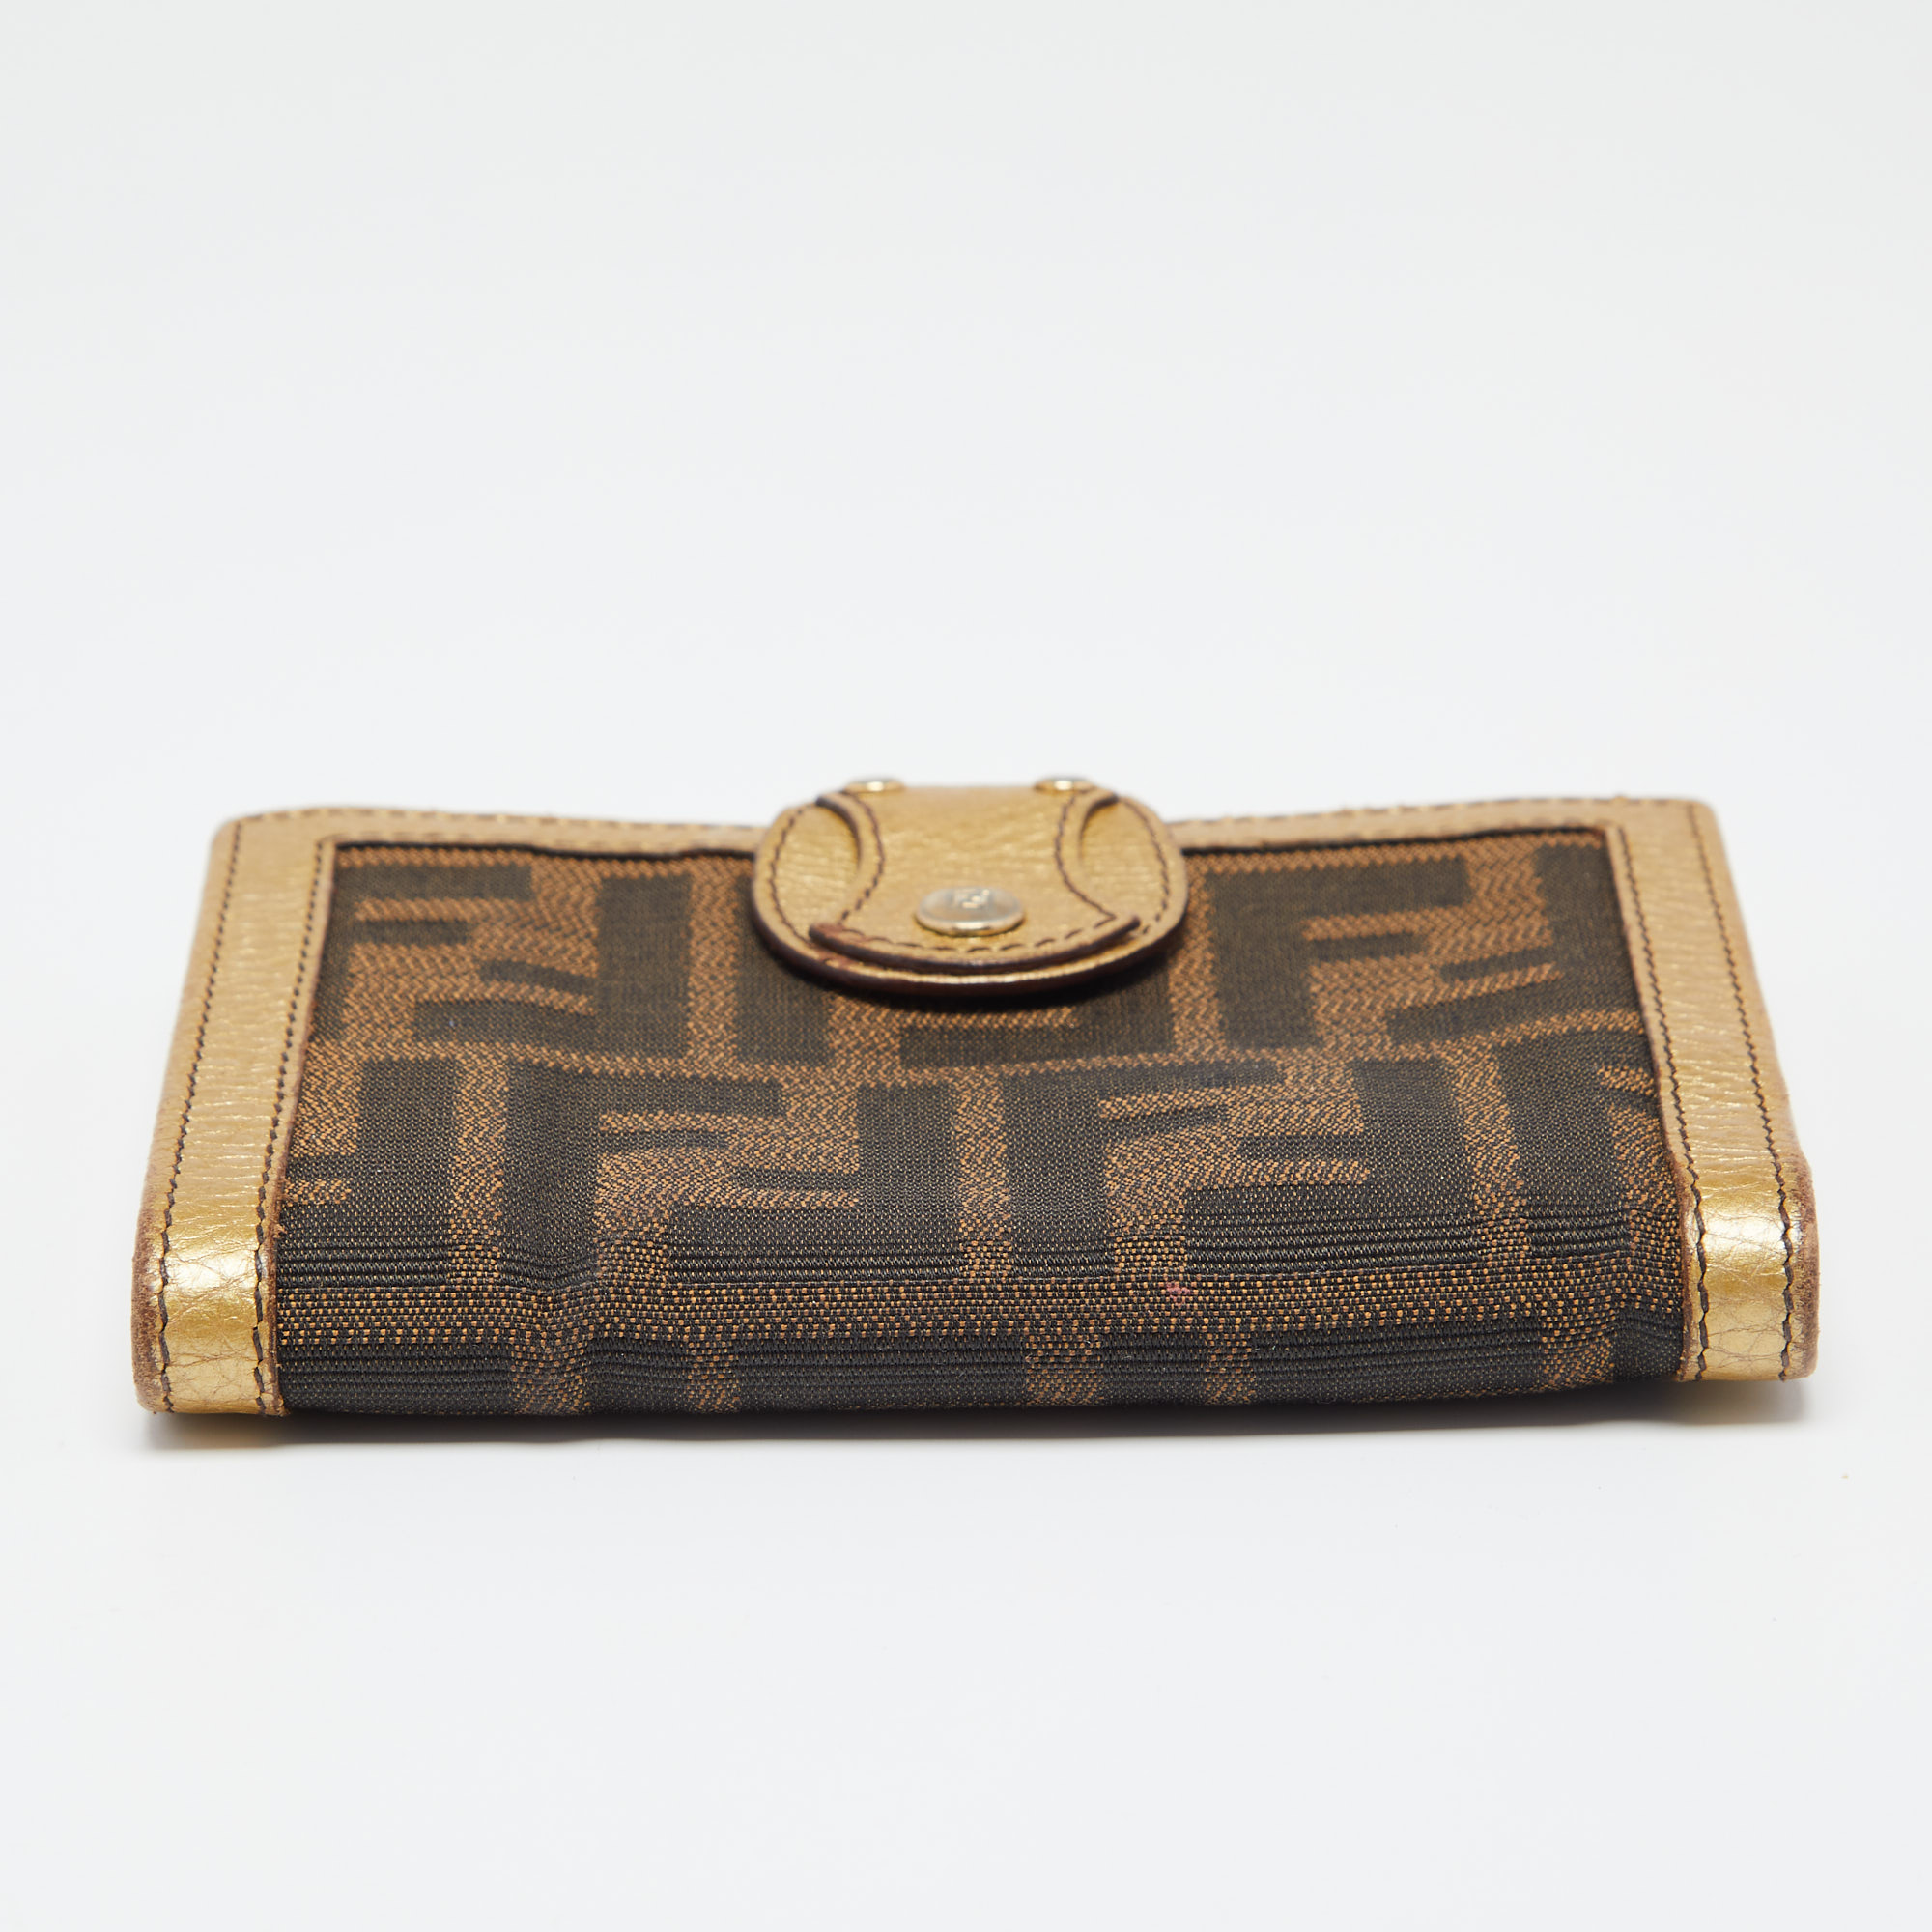 Fendi Tobacco/Gold Zucca Canvas And Leather French Compact Wallet